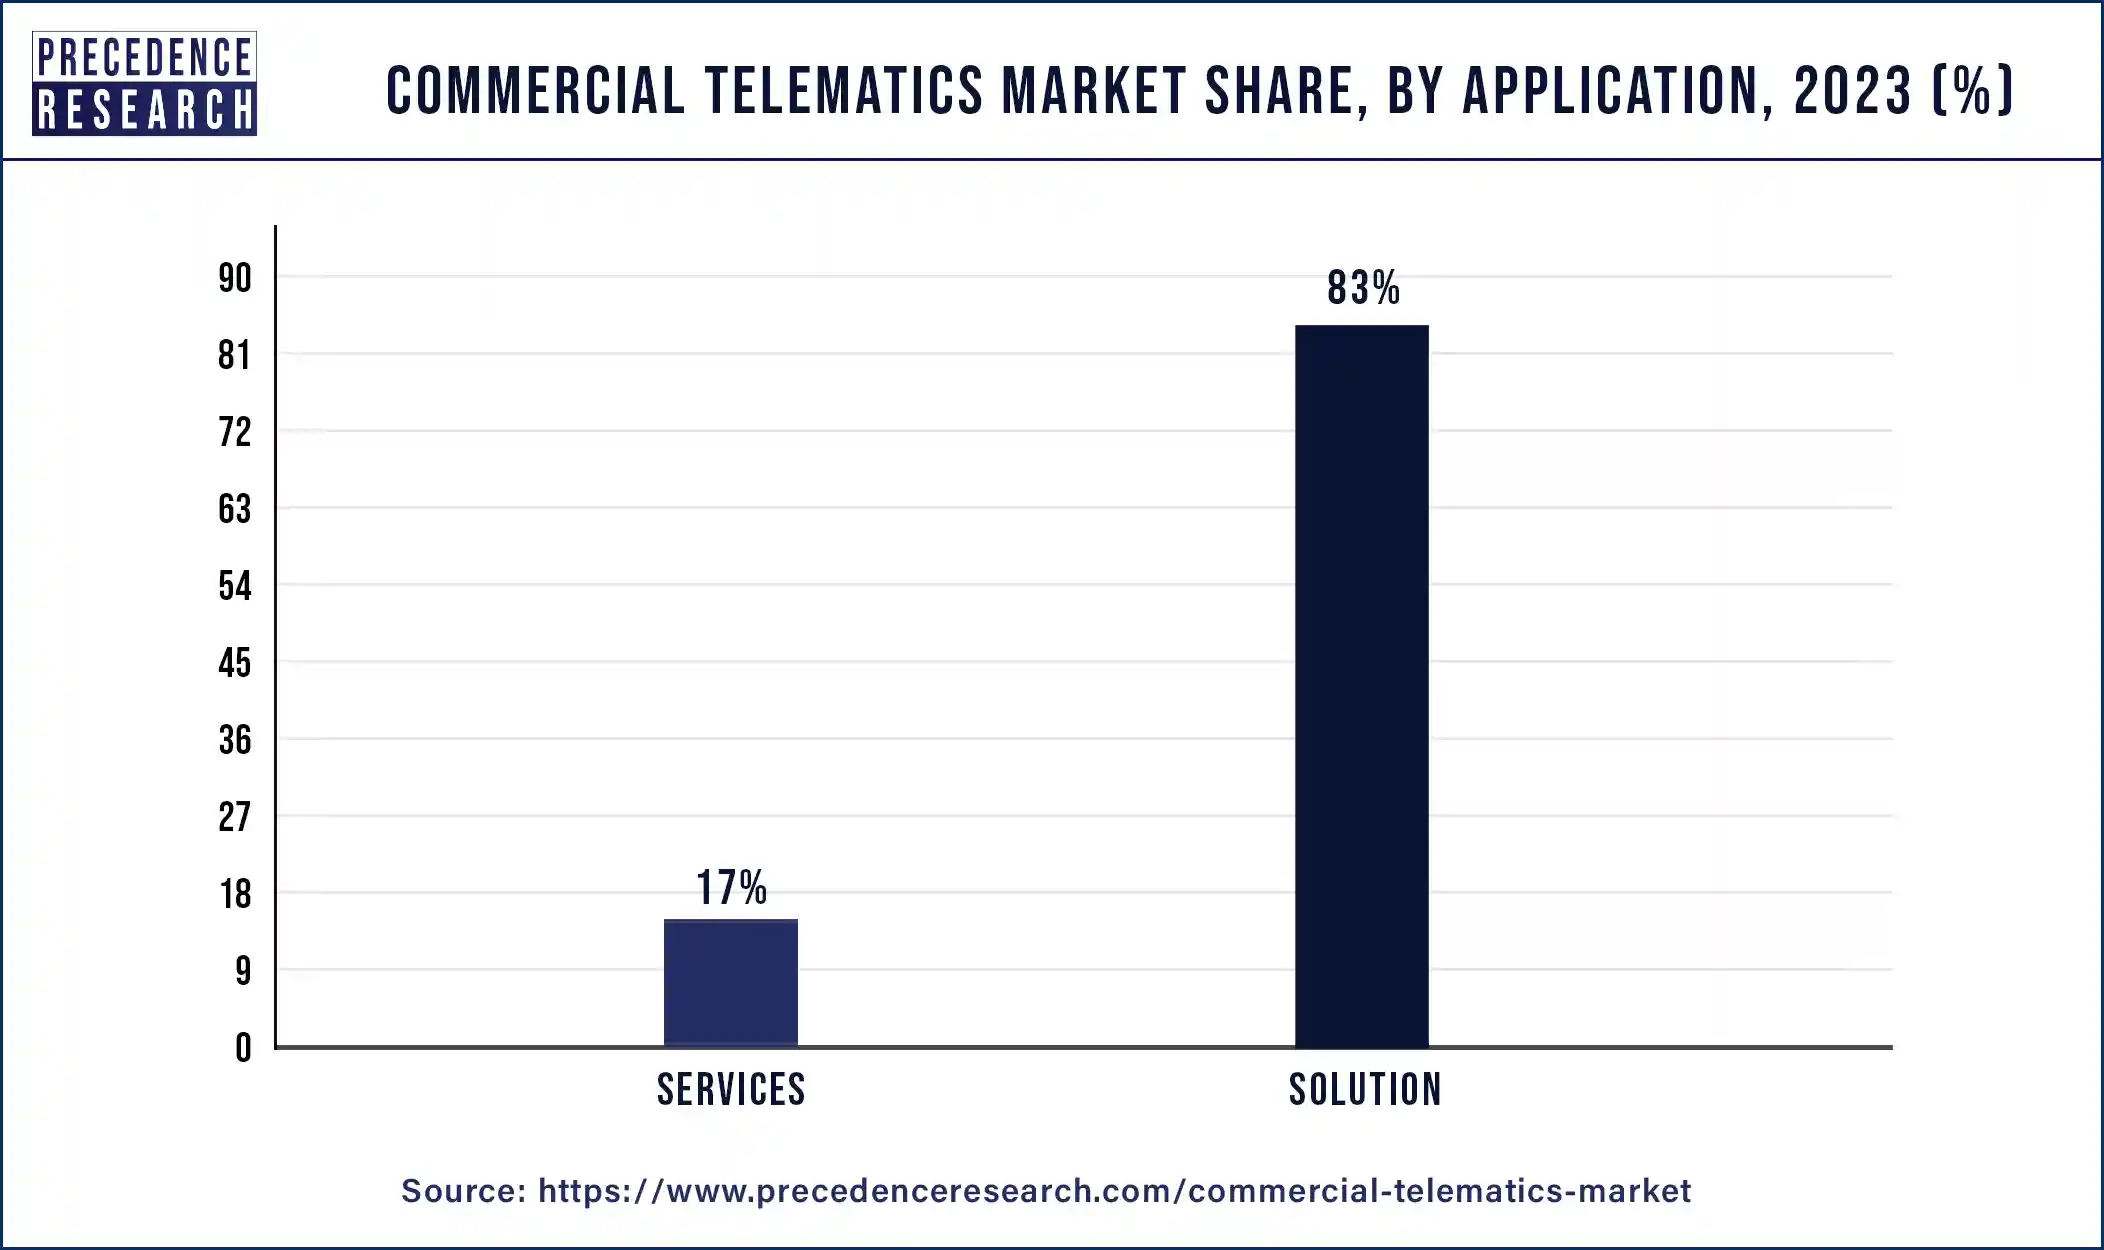 Commercial Telematics Market Share, By Application, 2023 (%)